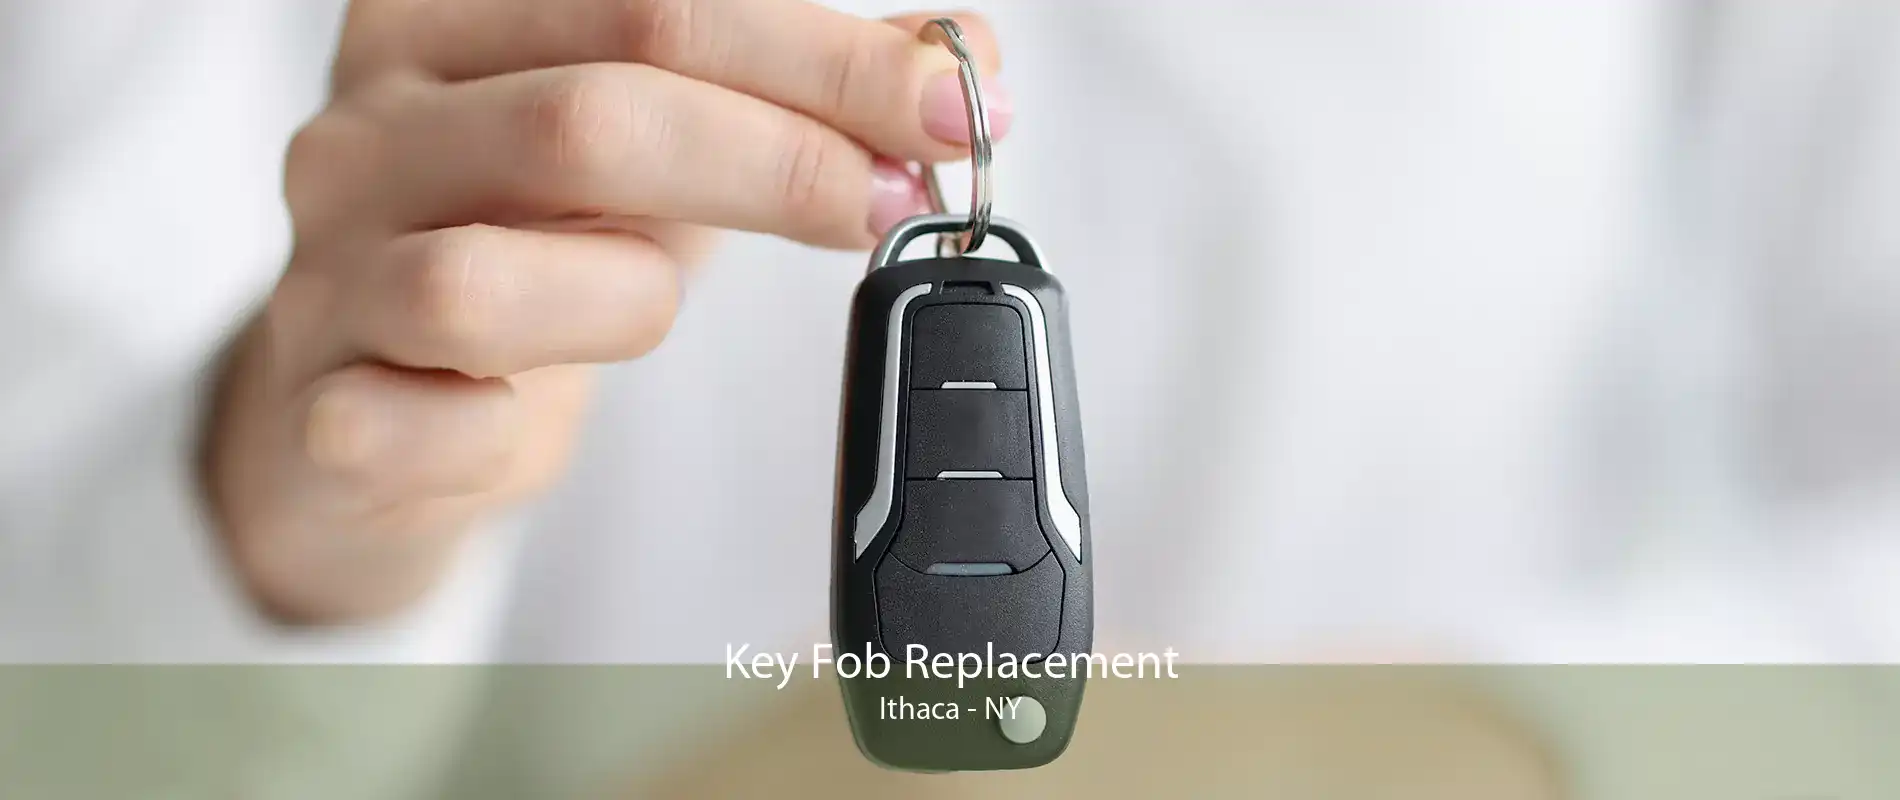 Key Fob Replacement Ithaca - NY